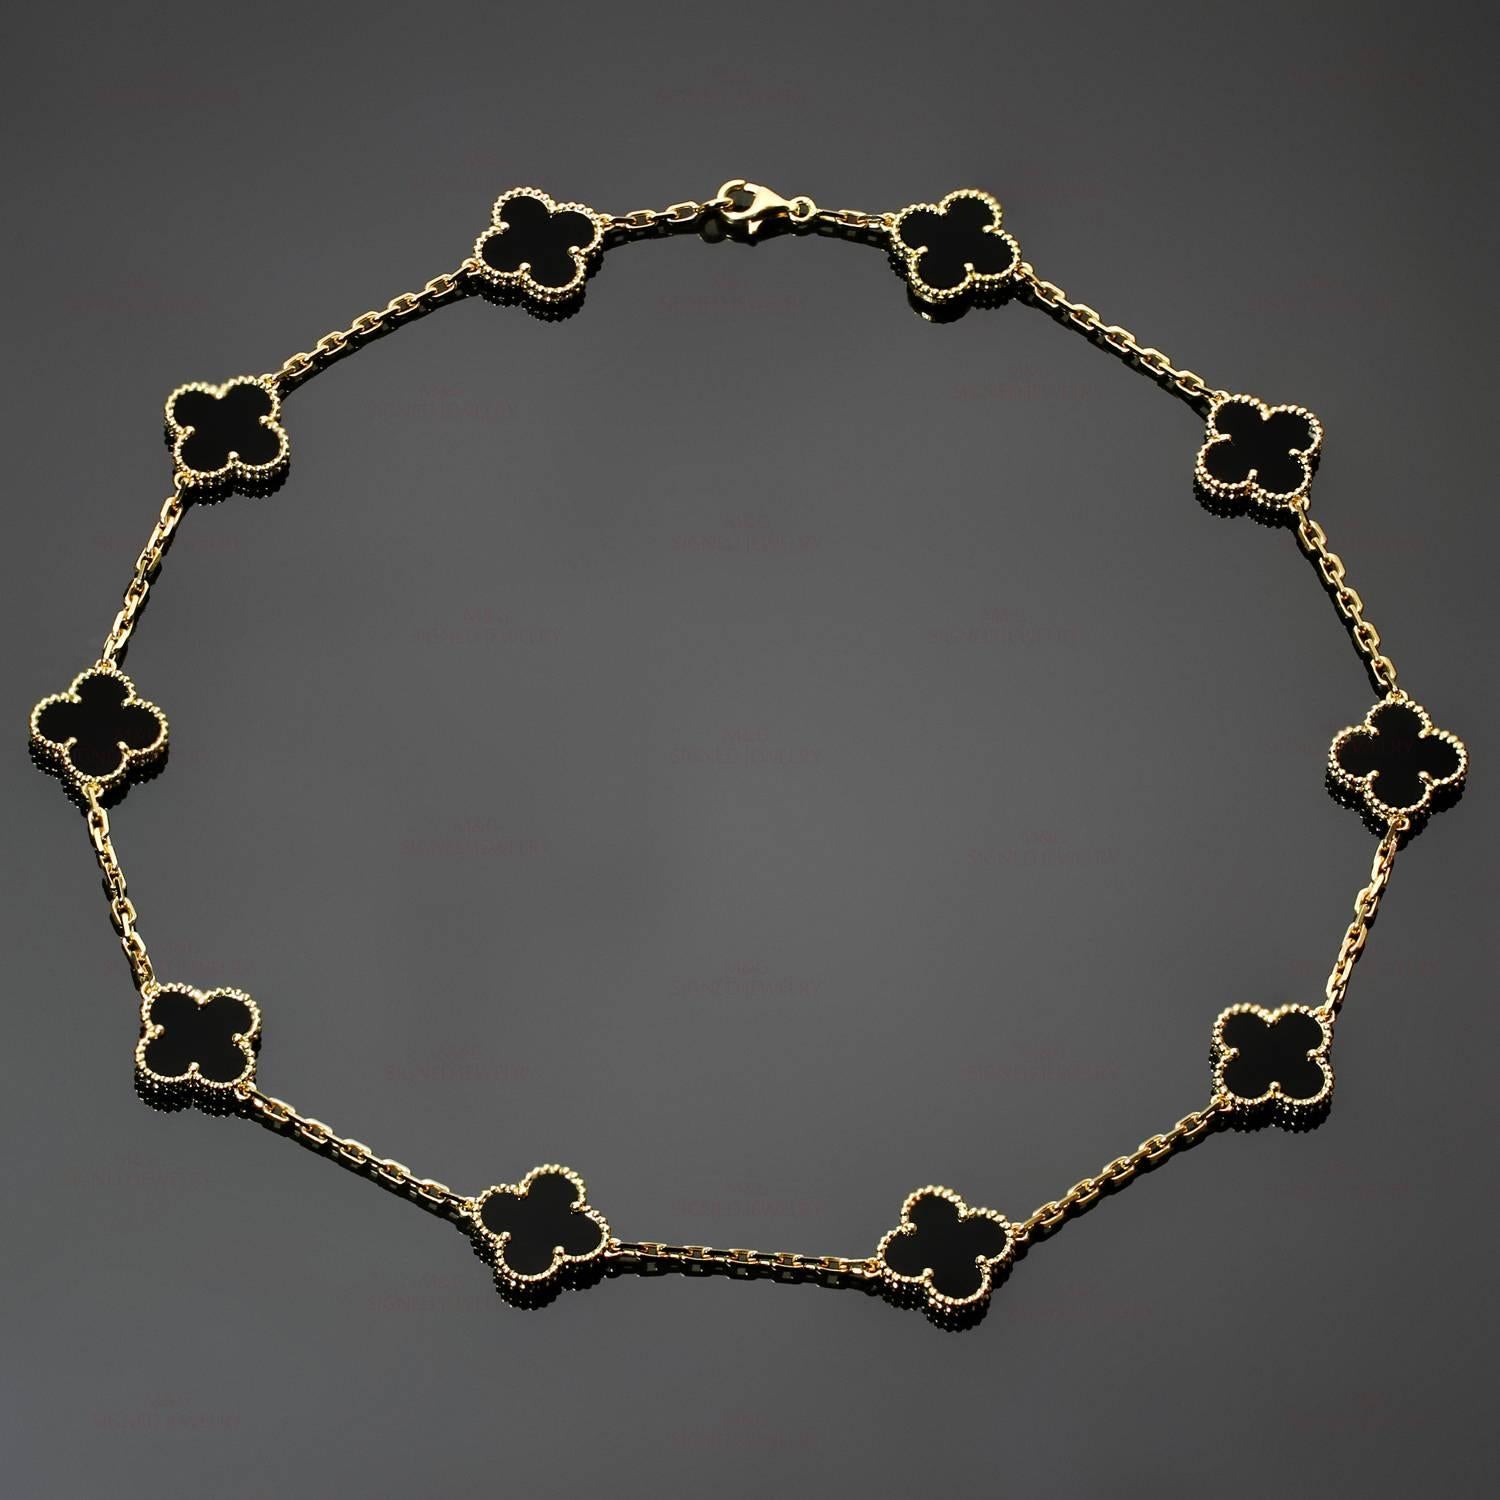 This classic Van Cleef & Arpels necklace is crafted in 18k yellow gold and features 10 lucky clover motifs beautifully inlaid with black onyx in round bead settings. Made in France circa 2000s. Measurements: 0.59